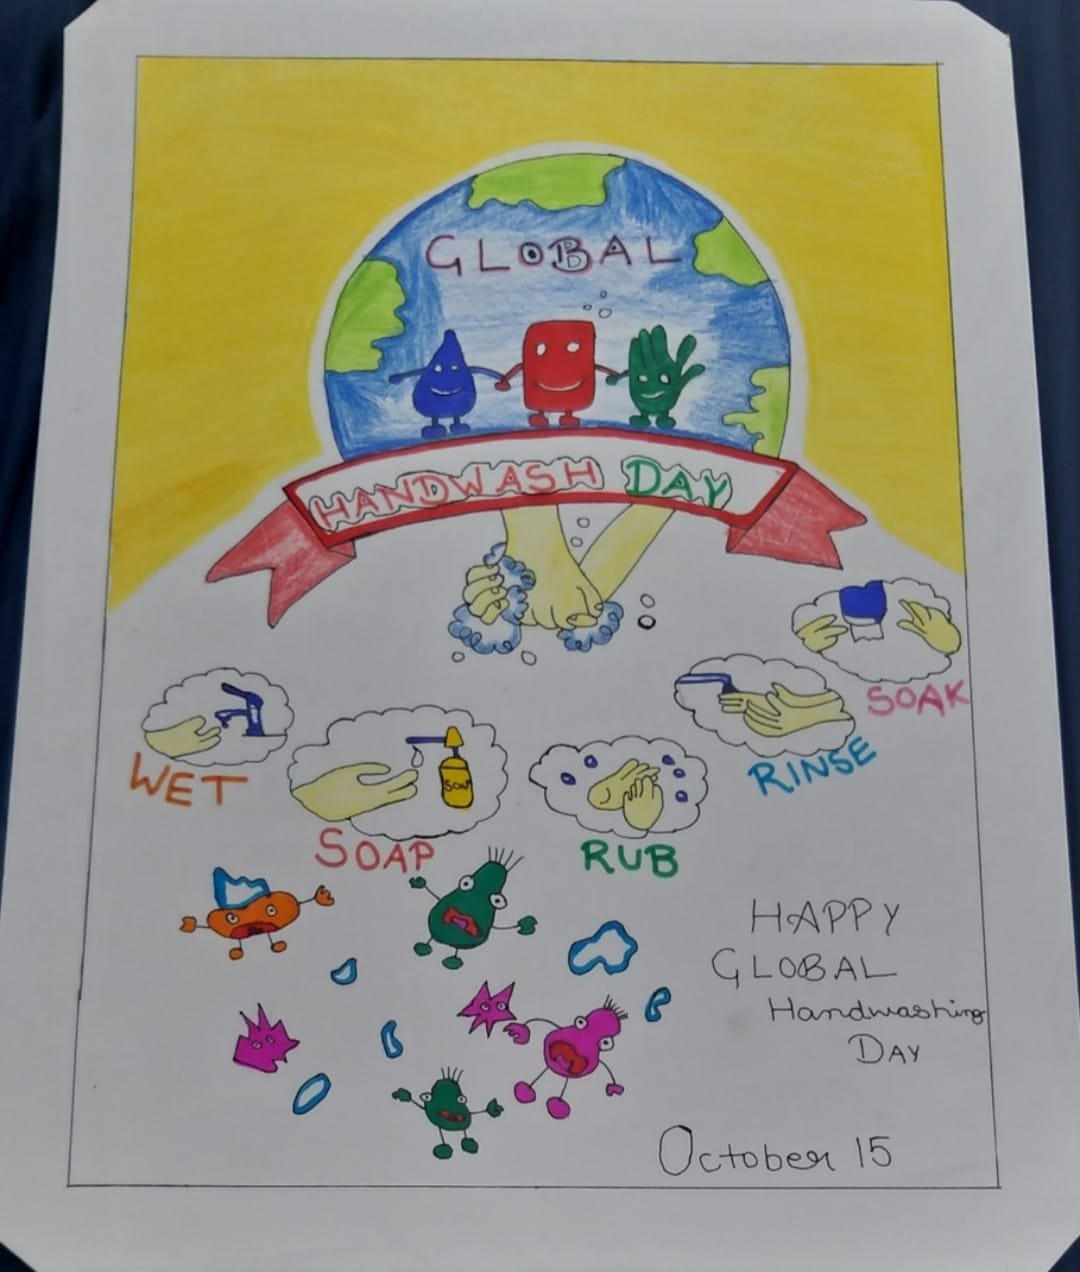 Global Handwashing Day poster drawing l How to draw World Hand Hygiene Day  drawing step by step - YouTube